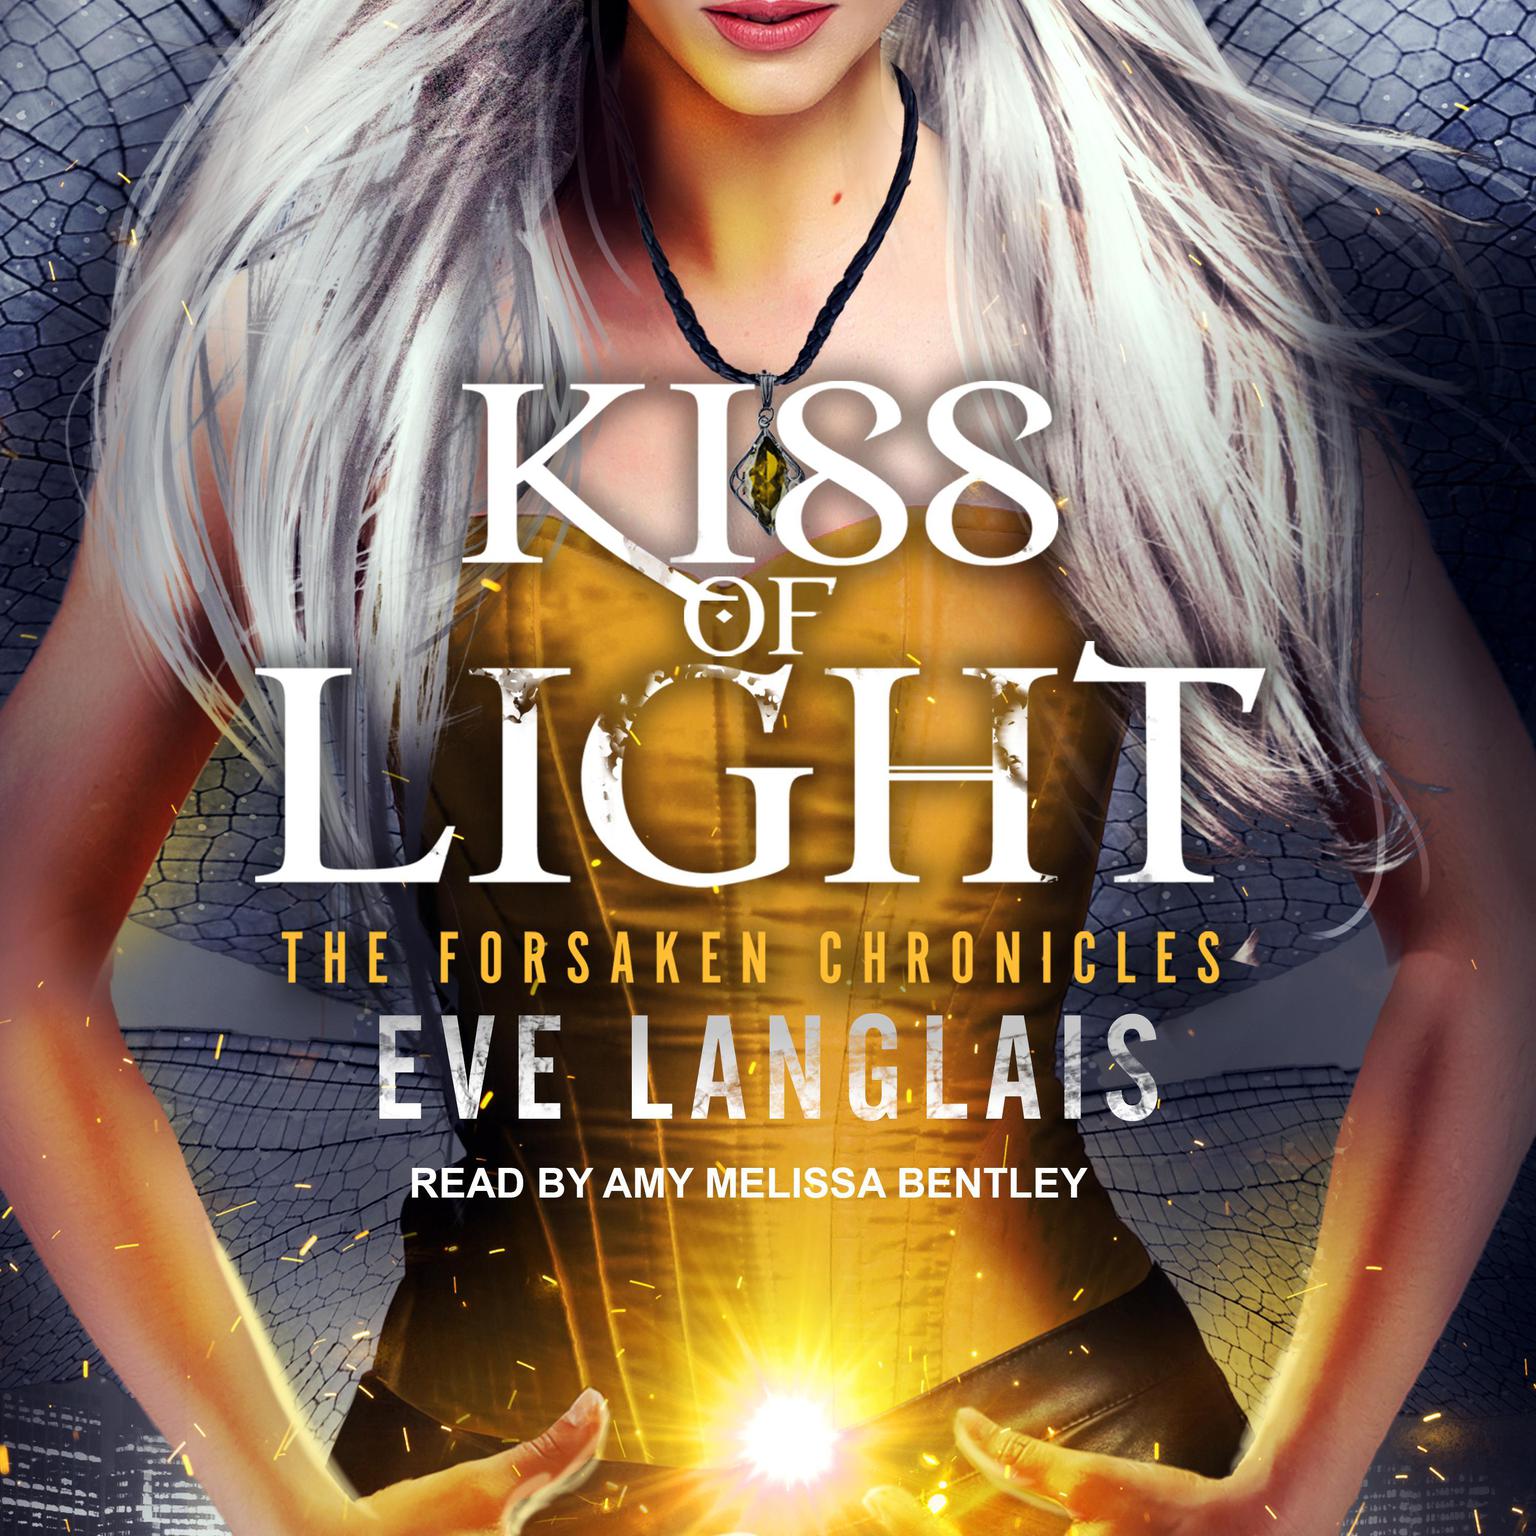 Kiss of Light Audiobook, by Eve Langlais